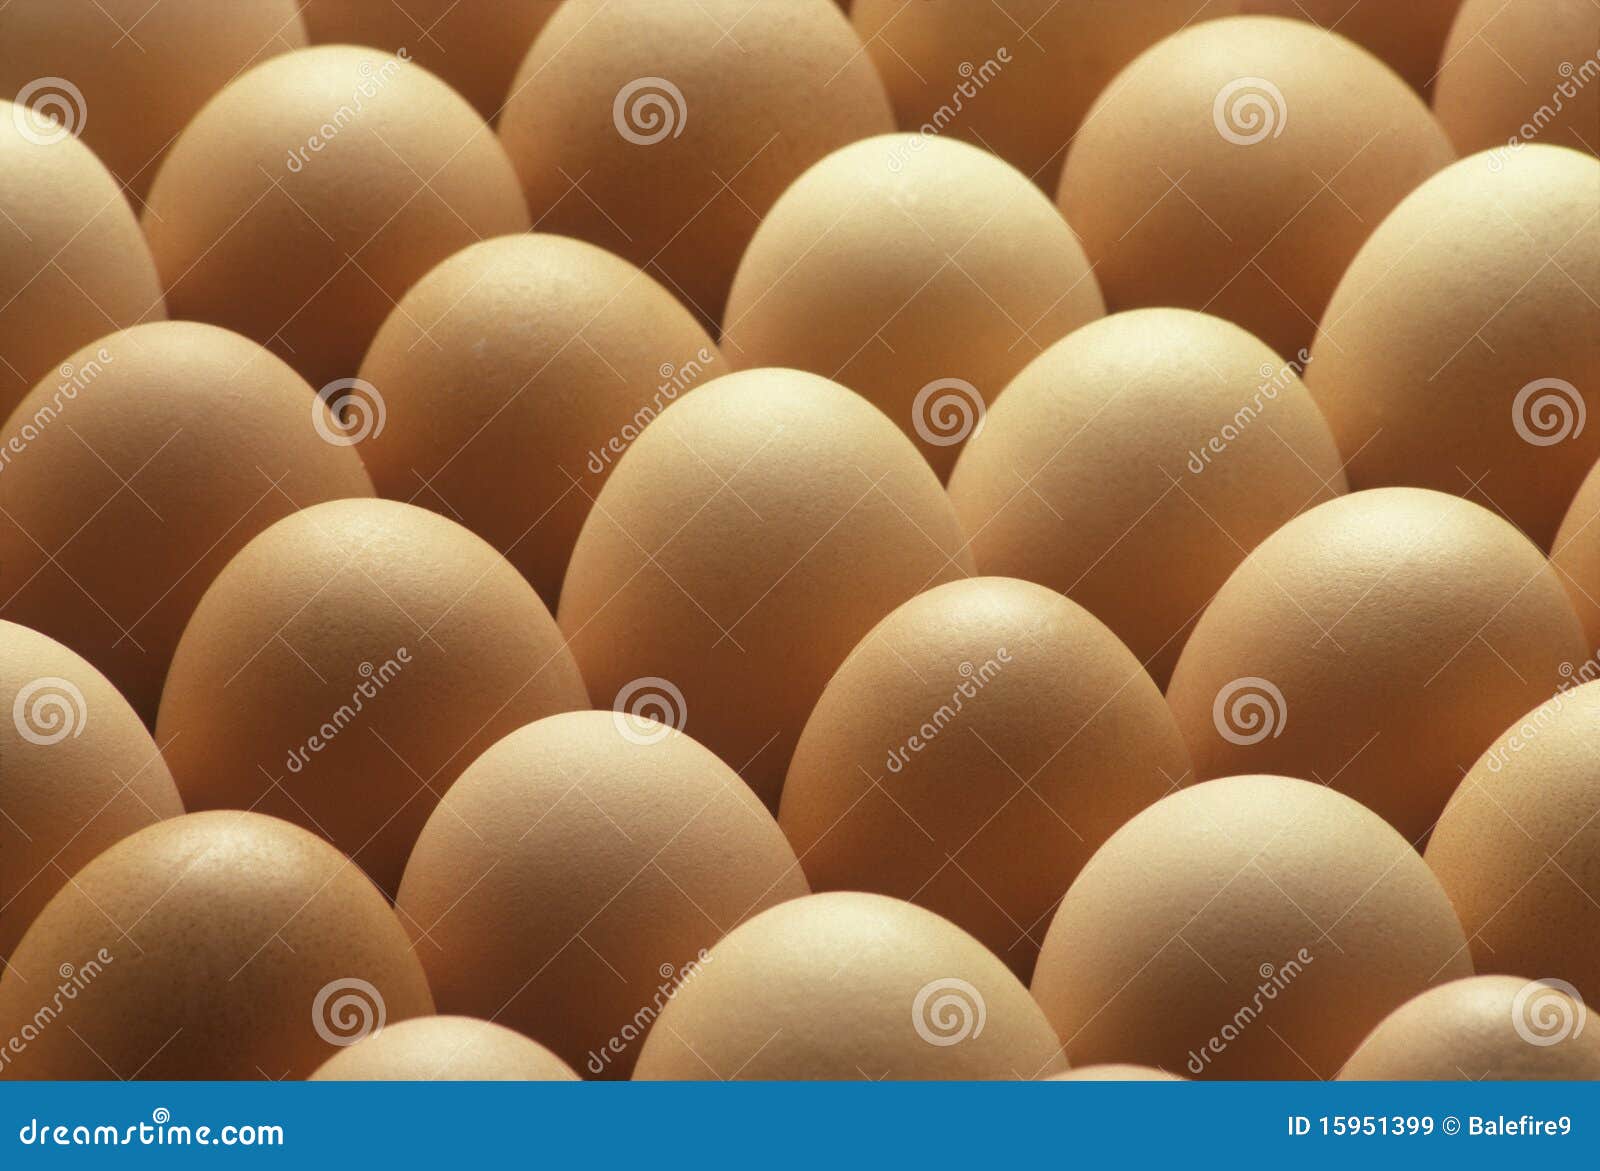 country brown eggs lined up